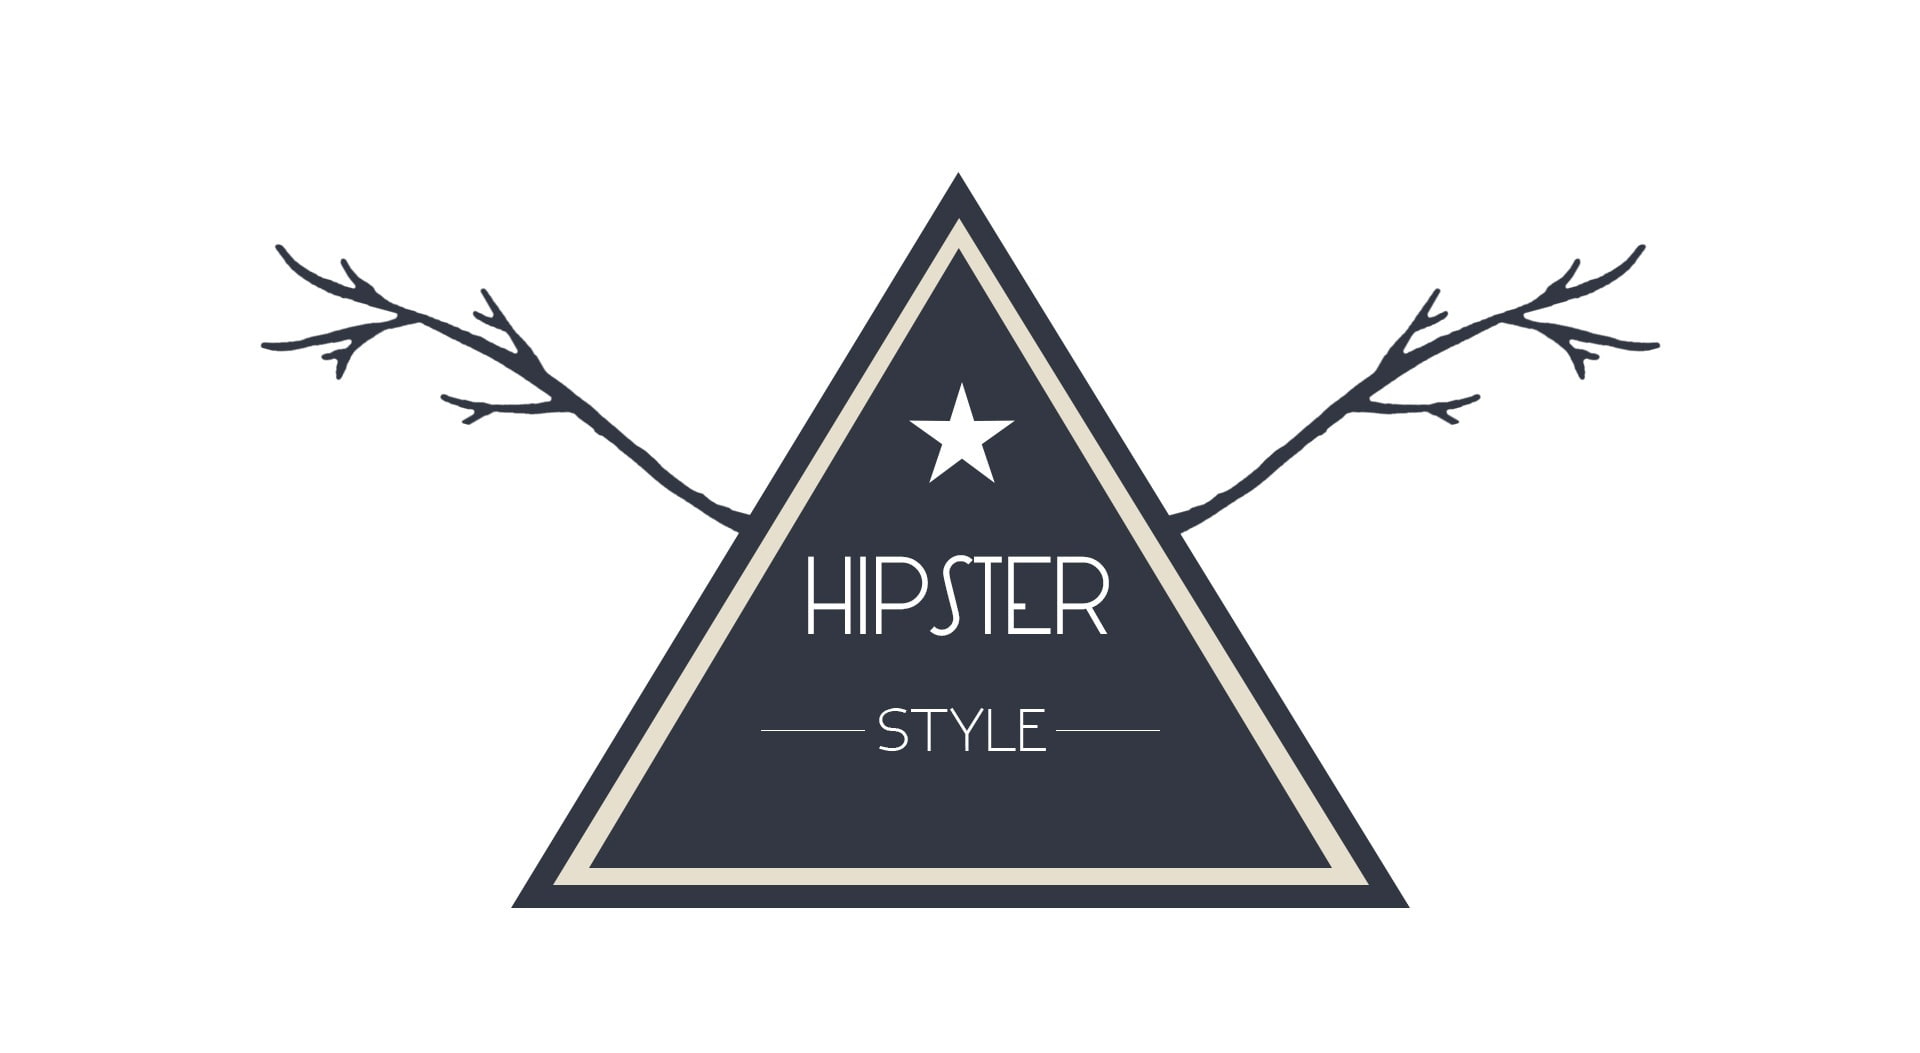 Hipster Style Badge, Hipster Style logo, Artistic, Typography